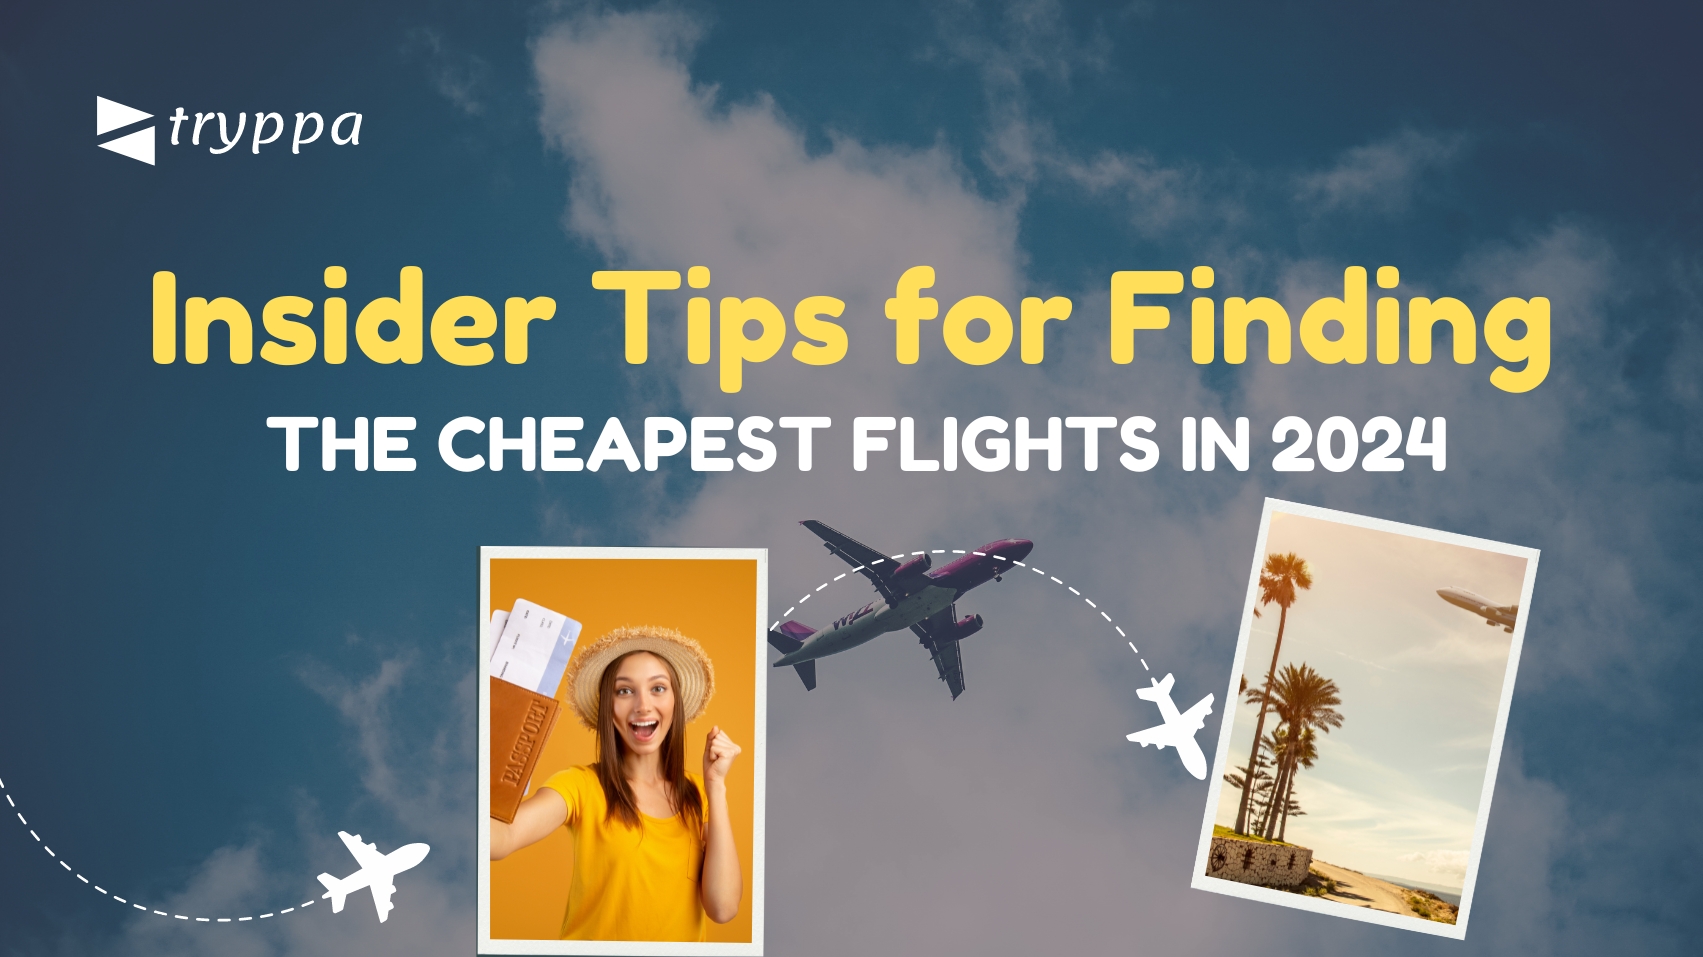 Insider Tips for Finding the Cheapest Flights in 2024